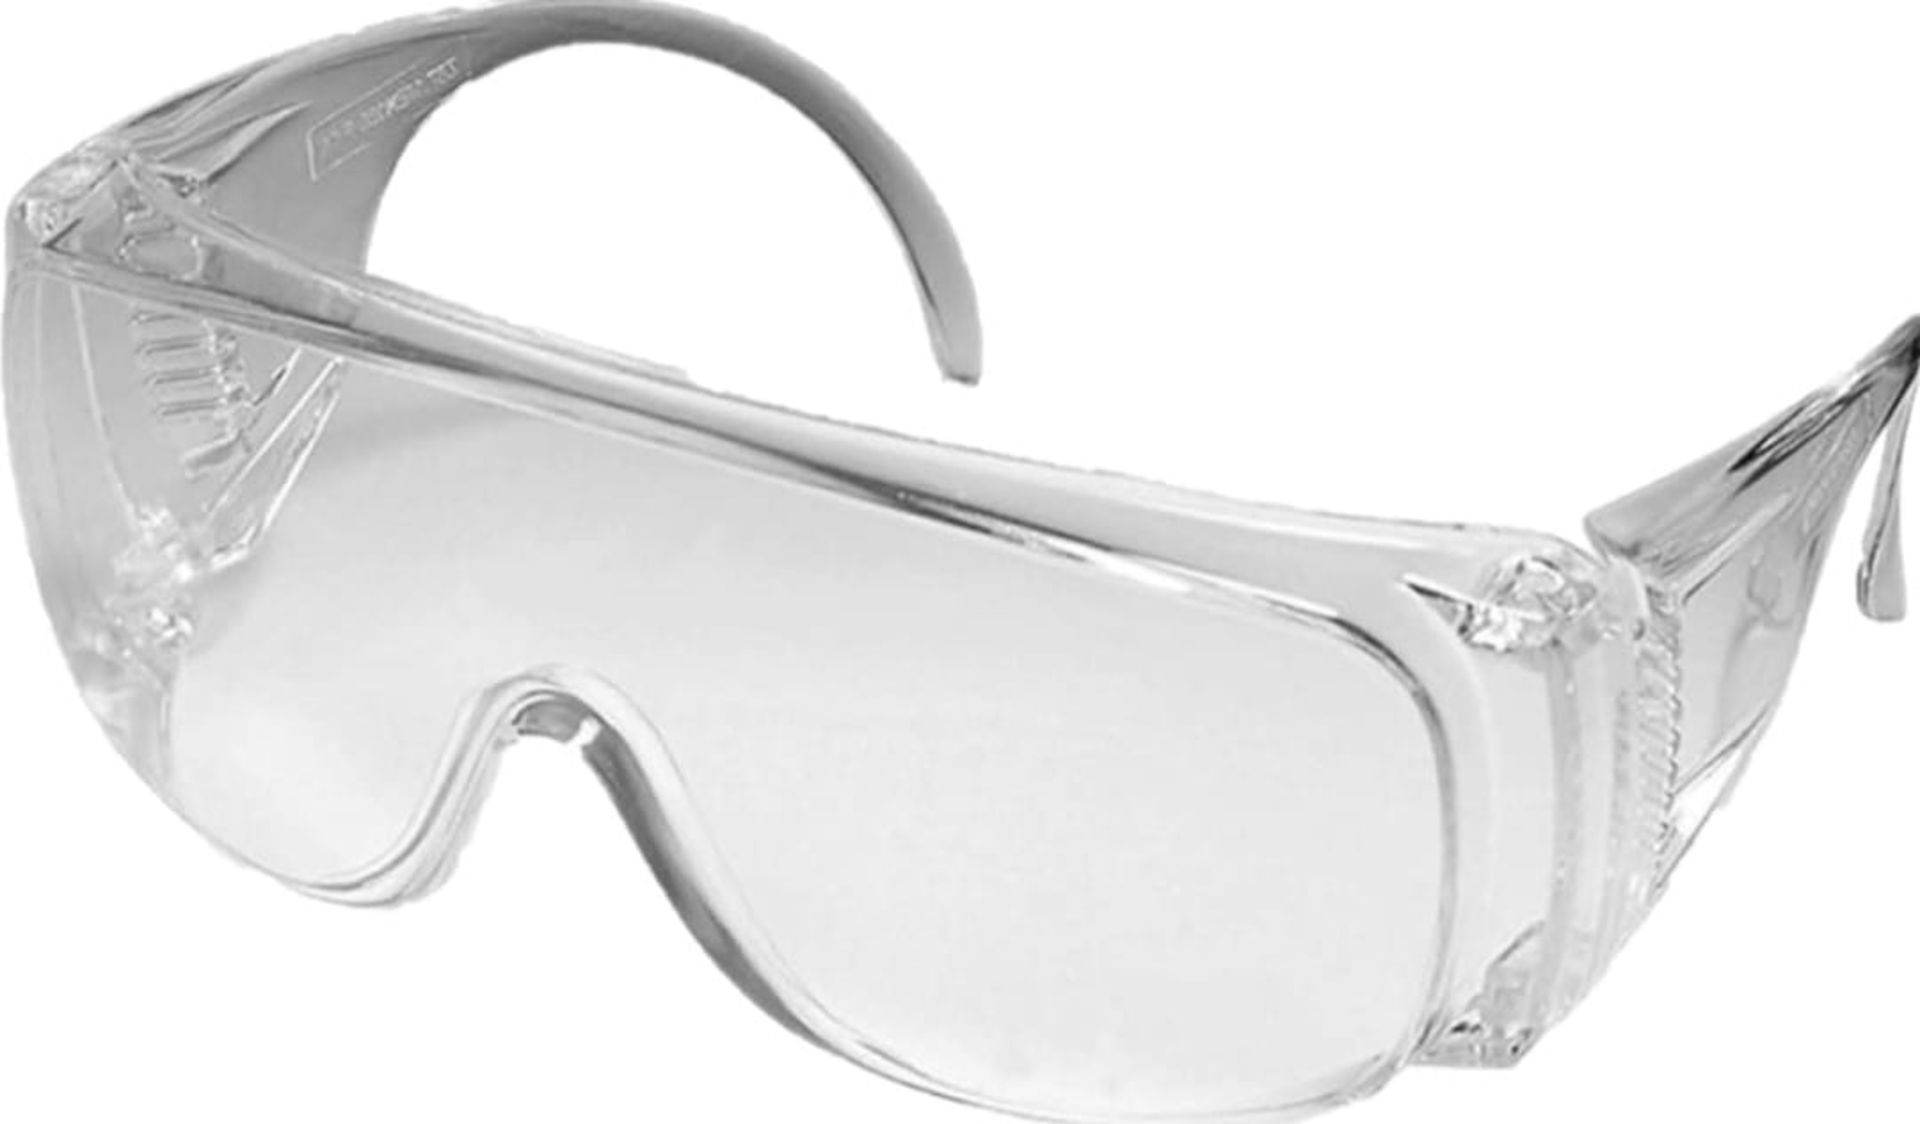 RRP £204.48 - X 36 BRAND NEW & BOXED PAIRS OF SAFETY GLASSES - SALEROOM ON TOP OF ROW (D).